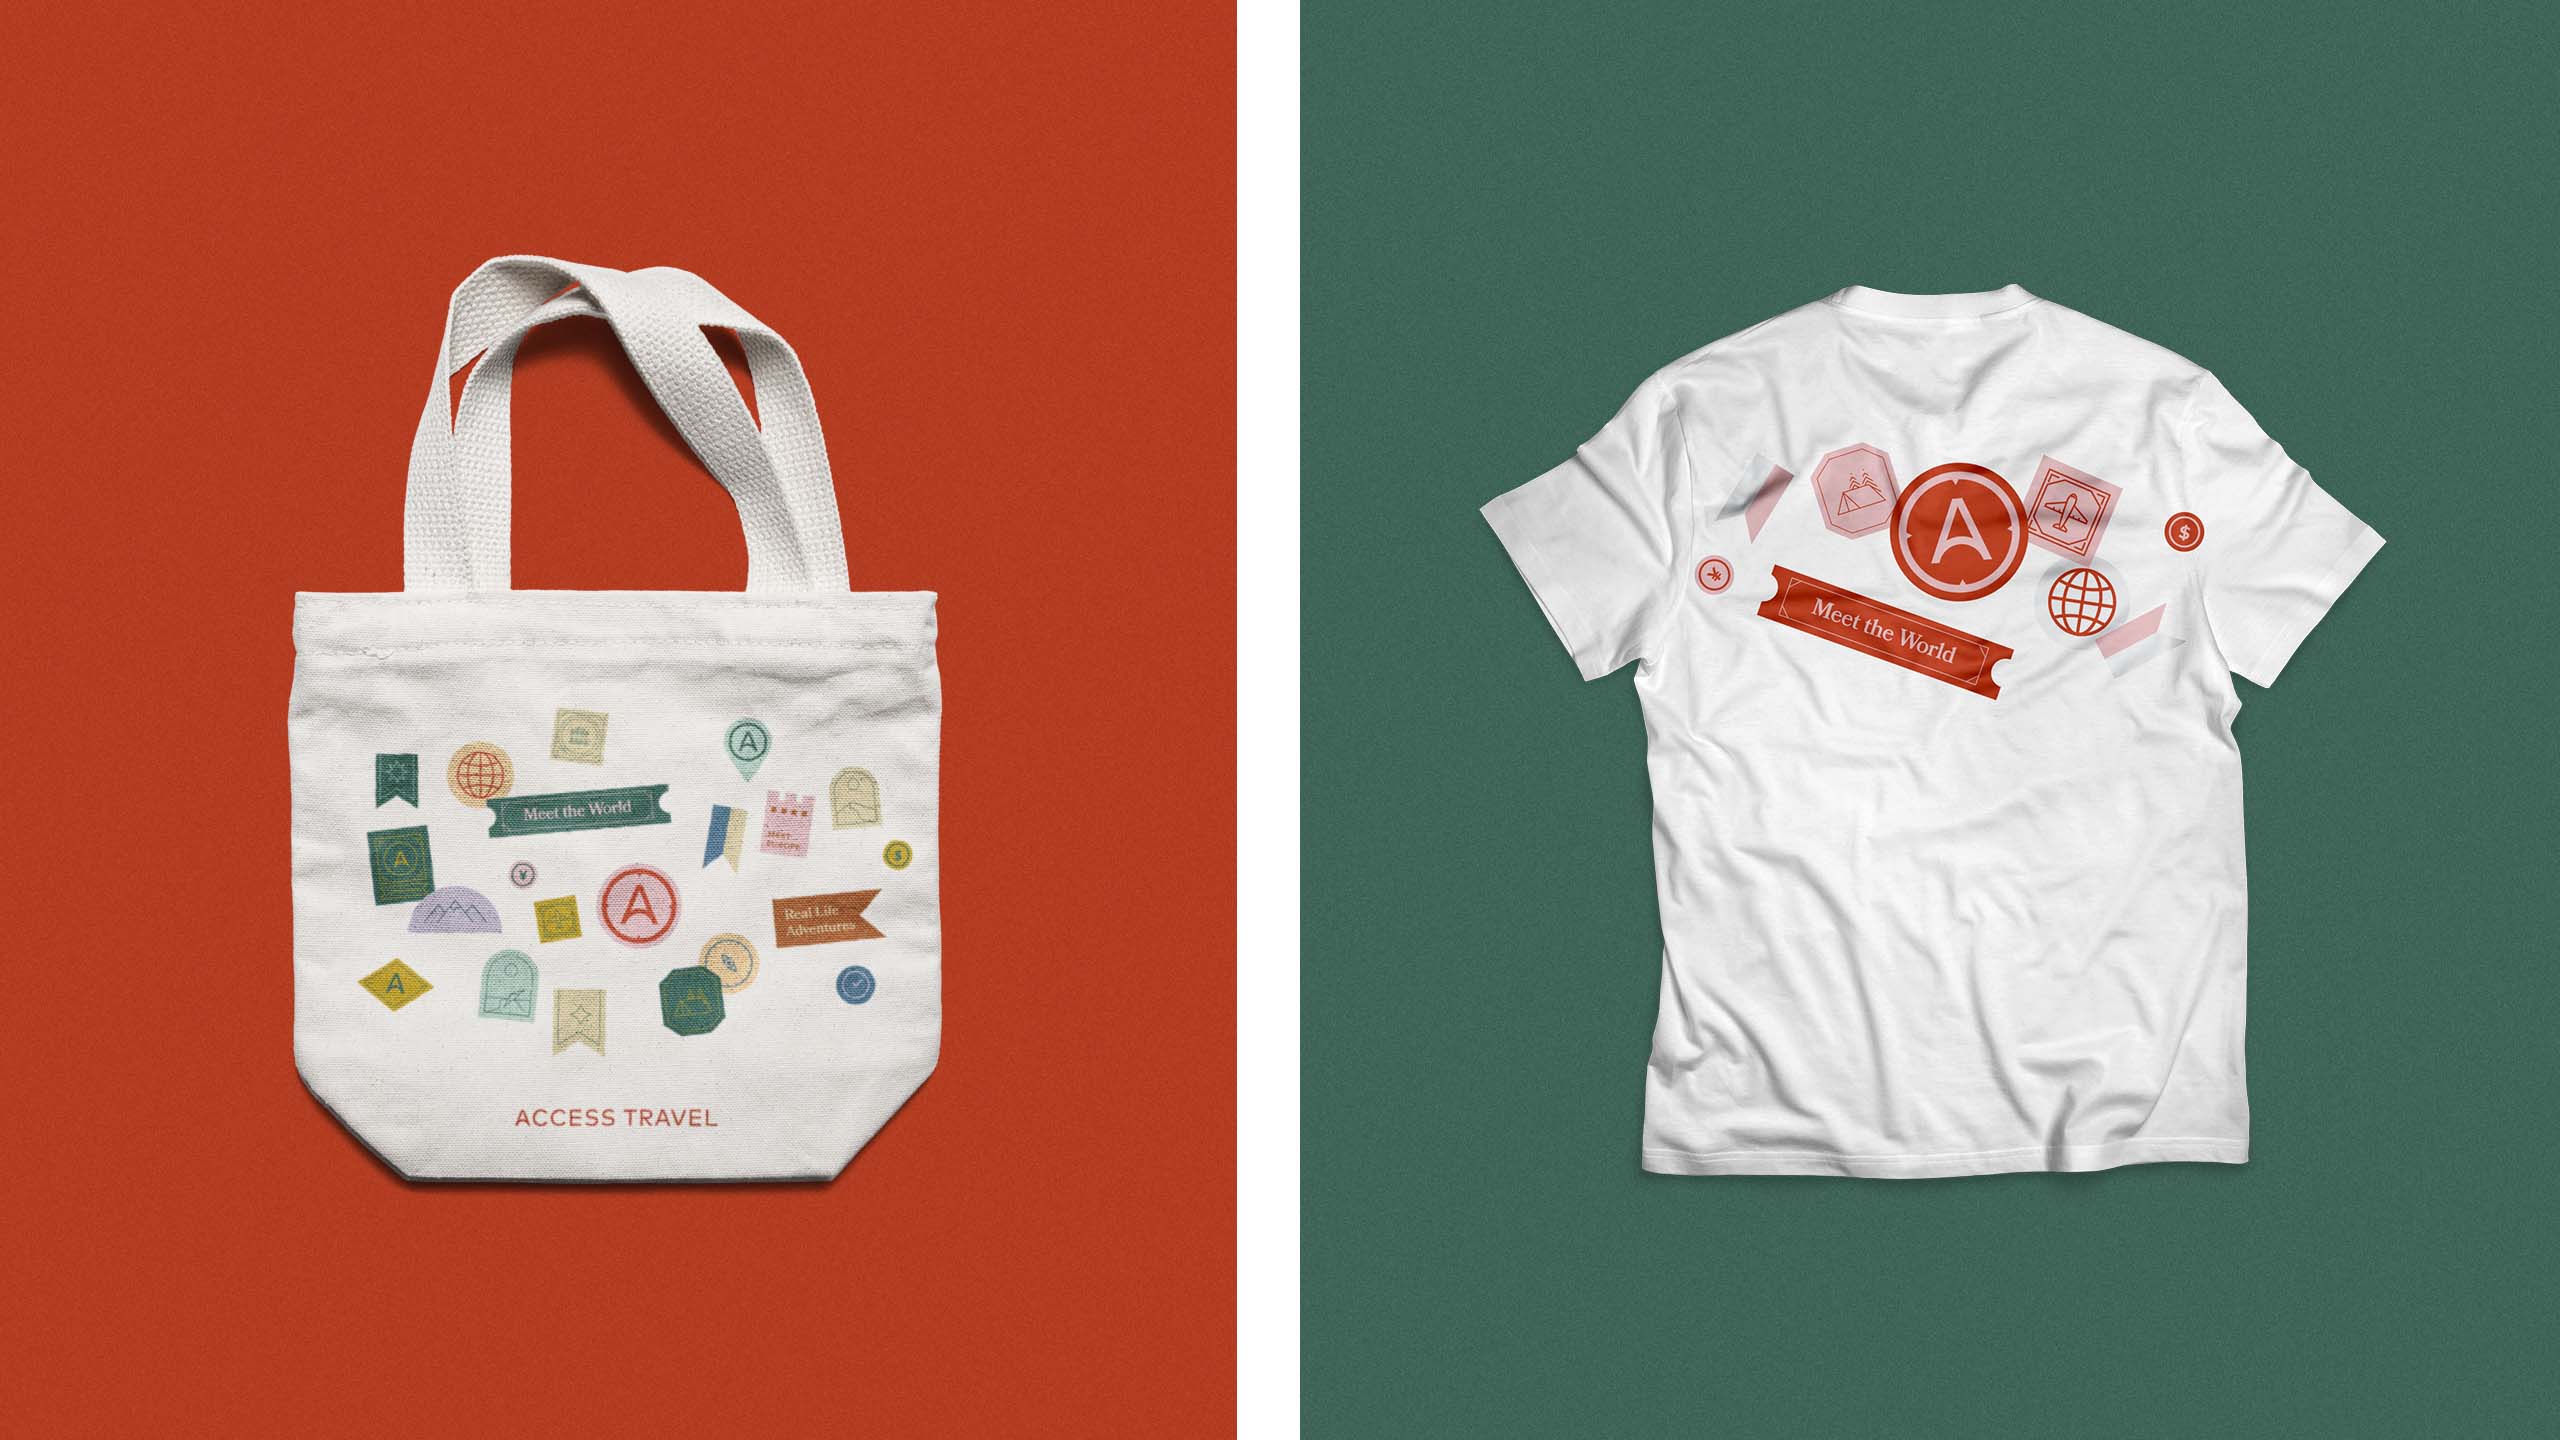 A fun and colorful totebag and tshirt design for travel brand Access Travel